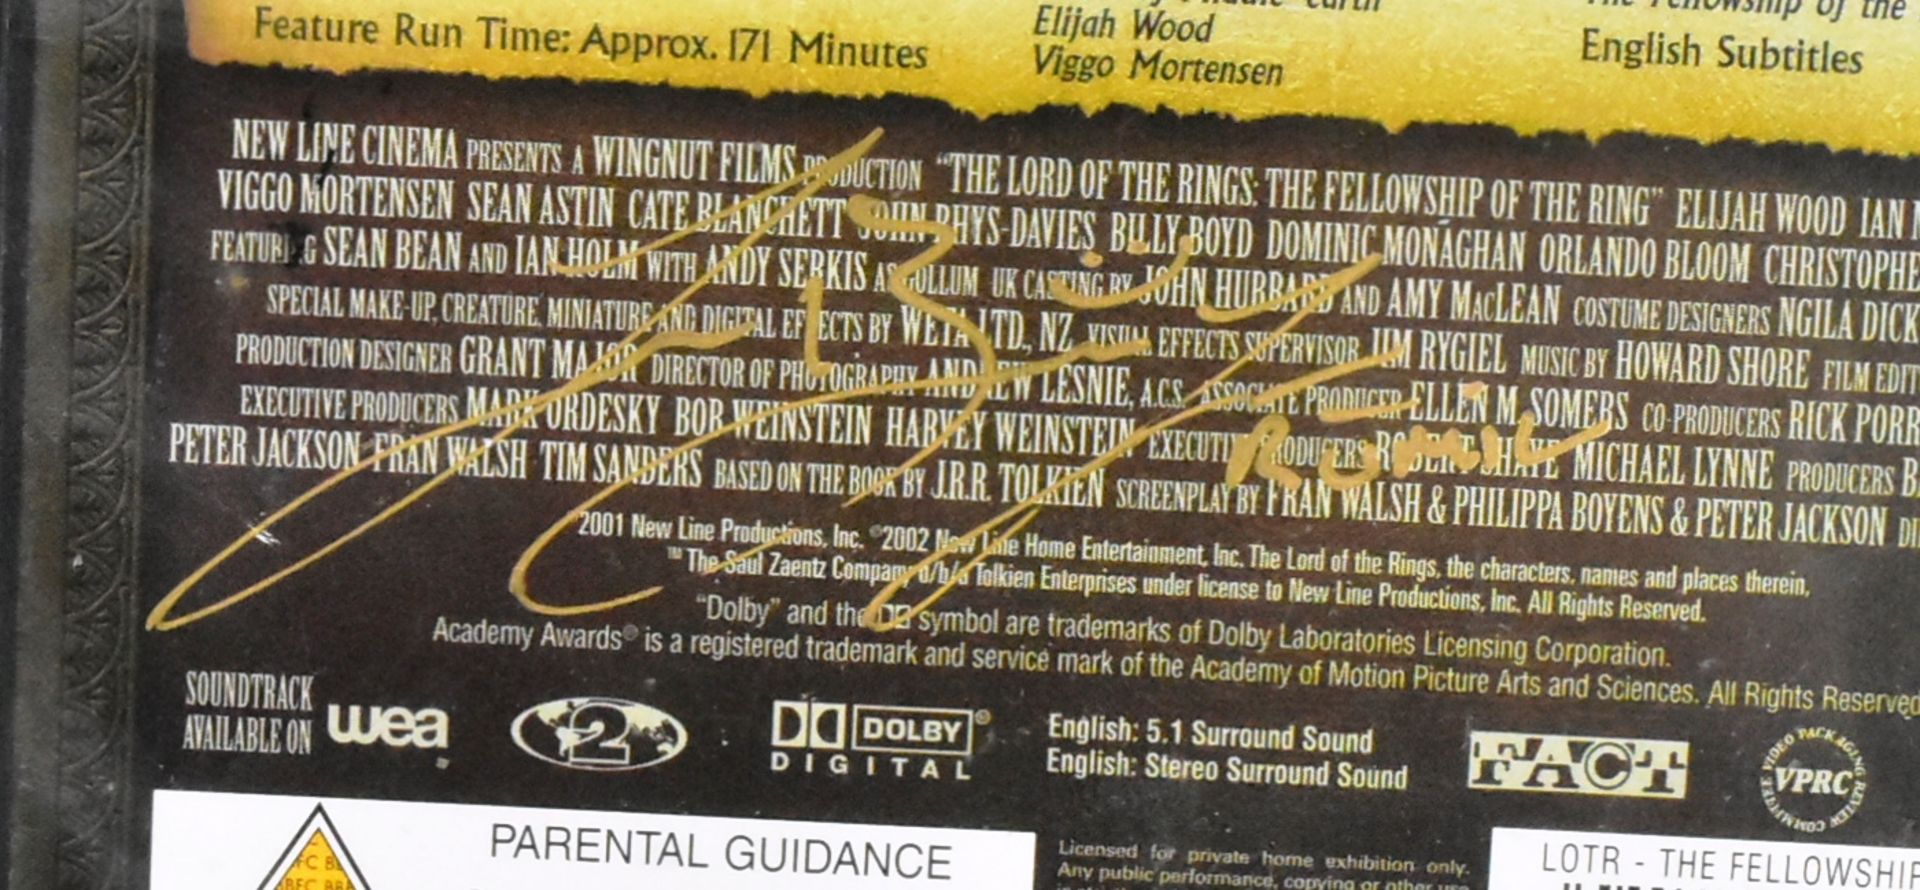 LORD OF THE RINGS - THE FELLOWSHIP OF THE RING - SIGNED DVD - Image 7 of 8